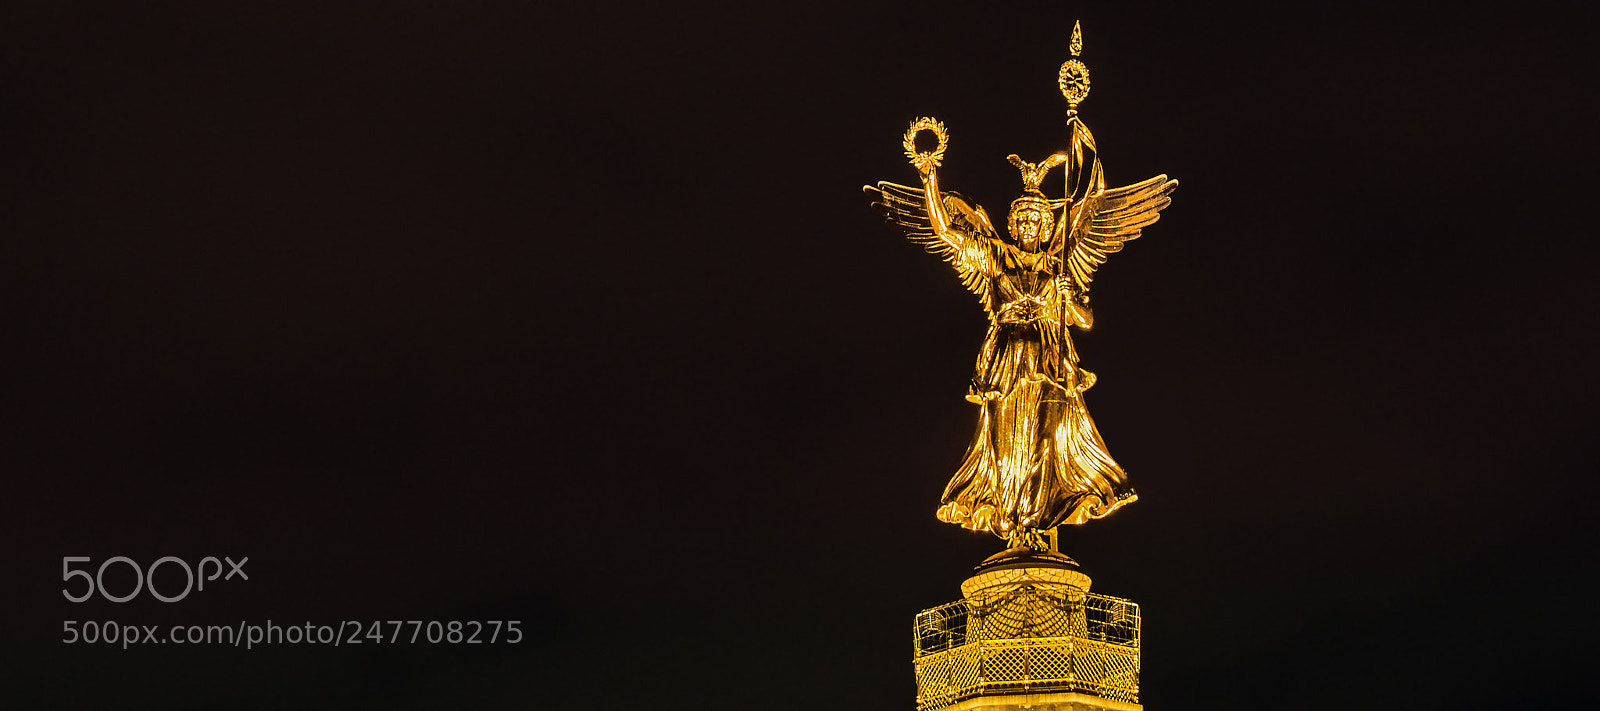 Sony ILCA-77M2 sample photo. Berlin victory column at photography